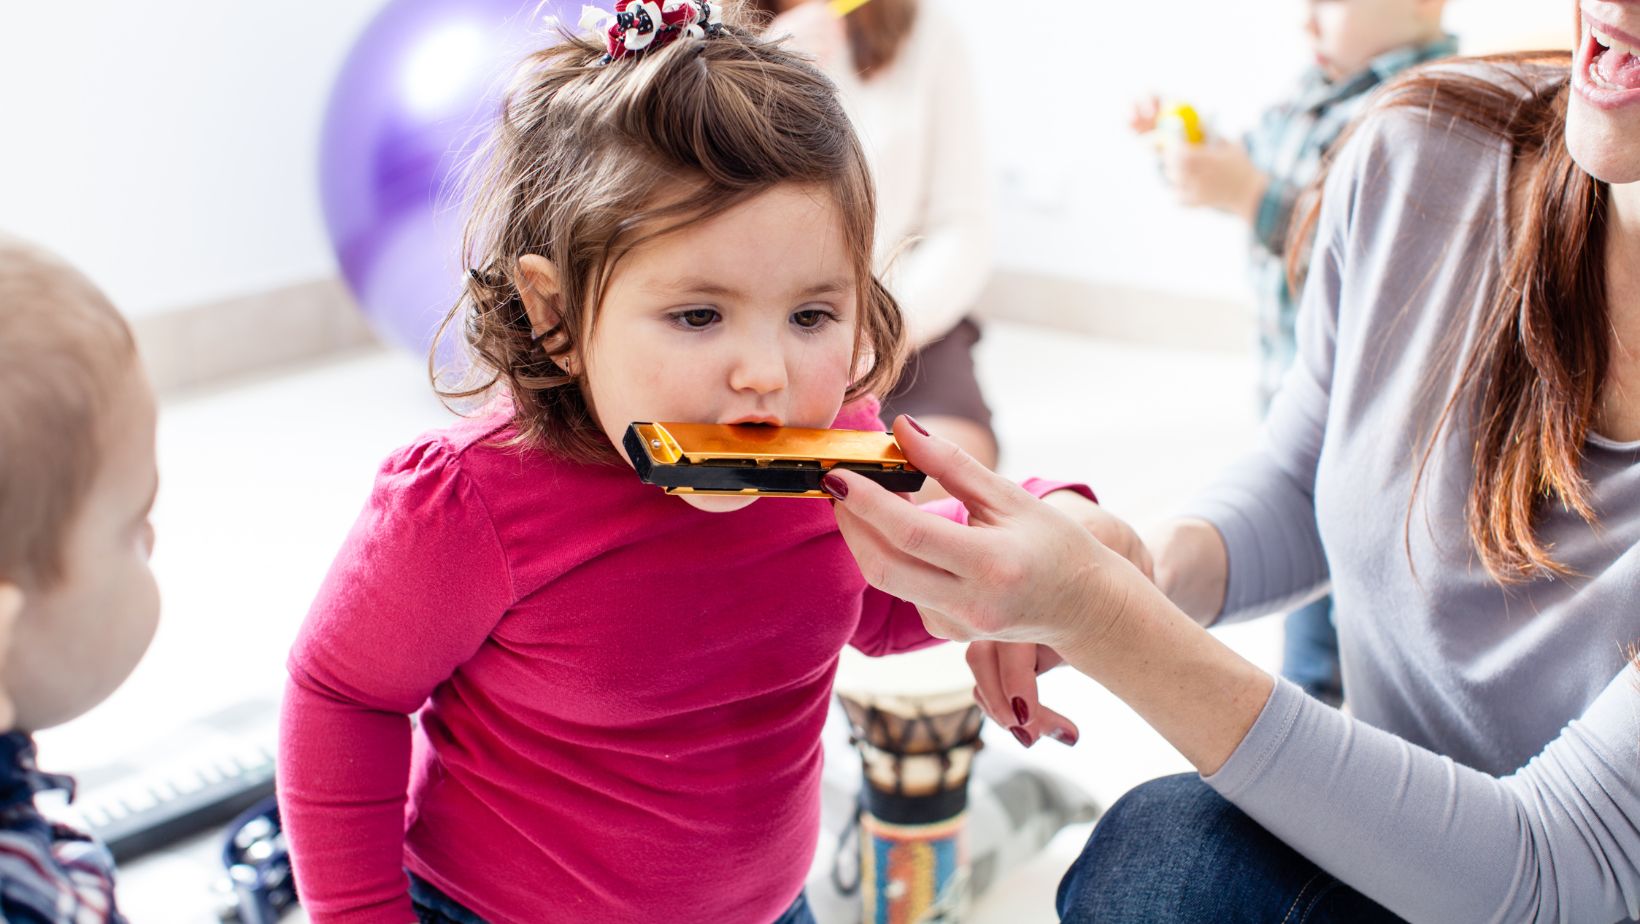 Image of a toddler girl with brown hair blowing into a harmonica